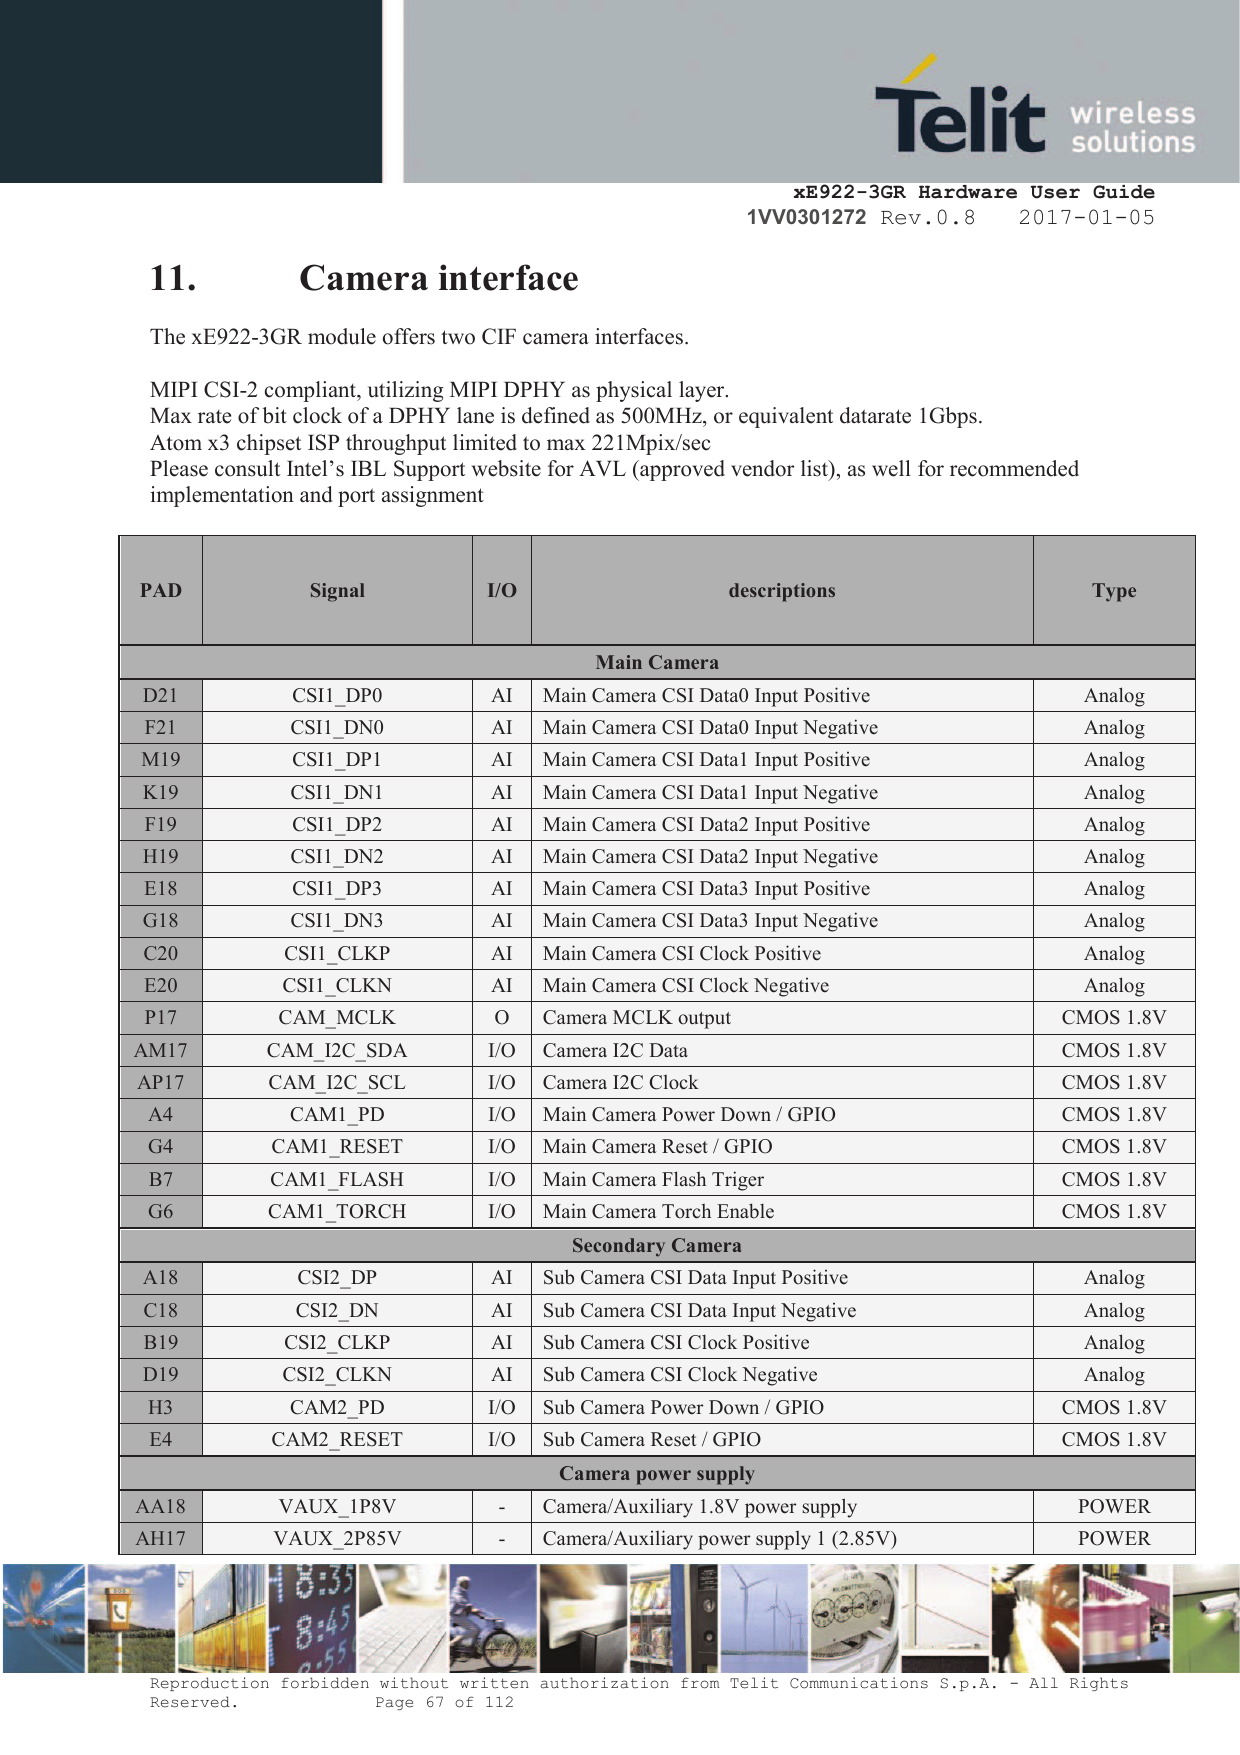     xE922-3GR Hardware User Guide 1VV0301272 Rev.0.8   2017-01-05 Reproduction forbidden without written authorization from Telit Communications S.p.A. - All Rights Reserved.    Page 67 of 112  11. Camera interface The xE922-3GR module offers two CIF camera interfaces.  MIPI CSI-2 compliant, utilizing MIPI DPHY as physical layer. Max rate of bit clock of a DPHY lane is defined as 500MHz, or equivalent datarate 1Gbps. Atom x3 chipset ISP throughput limited to max 221Mpix/sec Please consult Intel’s IBL Support website for AVL (approved vendor list), as well for recommended implementation and port assignment  PAD Signal I/O descriptions  Type Main Camera D21 CSI1_DP0 AI Main Camera CSI Data0 Input Positive Analog F21 CSI1_DN0 AI Main Camera CSI Data0 Input Negative Analog M19 CSI1_DP1 AI Main Camera CSI Data1 Input Positive Analog K19 CSI1_DN1 AI Main Camera CSI Data1 Input Negative Analog F19 CSI1_DP2 AI Main Camera CSI Data2 Input Positive Analog H19 CSI1_DN2 AI Main Camera CSI Data2 Input Negative Analog E18 CSI1_DP3 AI Main Camera CSI Data3 Input Positive Analog G18 CSI1_DN3 AI Main Camera CSI Data3 Input Negative Analog C20 CSI1_CLKP AI Main Camera CSI Clock Positive Analog E20 CSI1_CLKN AI Main Camera CSI Clock Negative Analog P17 CAM_MCLK O Camera MCLK output CMOS 1.8V AM17 CAM_I2C_SDA I/O Camera I2C Data CMOS 1.8V AP17 CAM_I2C_SCL I/O Camera I2C Clock CMOS 1.8V A4 CAM1_PD I/O Main Camera Power Down / GPIO CMOS 1.8V G4 CAM1_RESET I/O Main Camera Reset / GPIO CMOS 1.8V B7 CAM1_FLASH I/O Main Camera Flash Triger CMOS 1.8V G6 CAM1_TORCH I/O Main Camera Torch Enable CMOS 1.8V Secondary Camera A18 CSI2_DP AI Sub Camera CSI Data Input Positive Analog C18 CSI2_DN AI Sub Camera CSI Data Input Negative Analog B19 CSI2_CLKP AI Sub Camera CSI Clock Positive Analog D19 CSI2_CLKN AI Sub Camera CSI Clock Negative Analog H3 CAM2_PD I/O Sub Camera Power Down / GPIO CMOS 1.8V E4 CAM2_RESET I/O Sub Camera Reset / GPIO CMOS 1.8V Camera power supply AA18 VAUX_1P8V - Camera/Auxiliary 1.8V power supply POWER AH17 VAUX_2P85V - Camera/Auxiliary power supply 1 (2.85V) POWER 